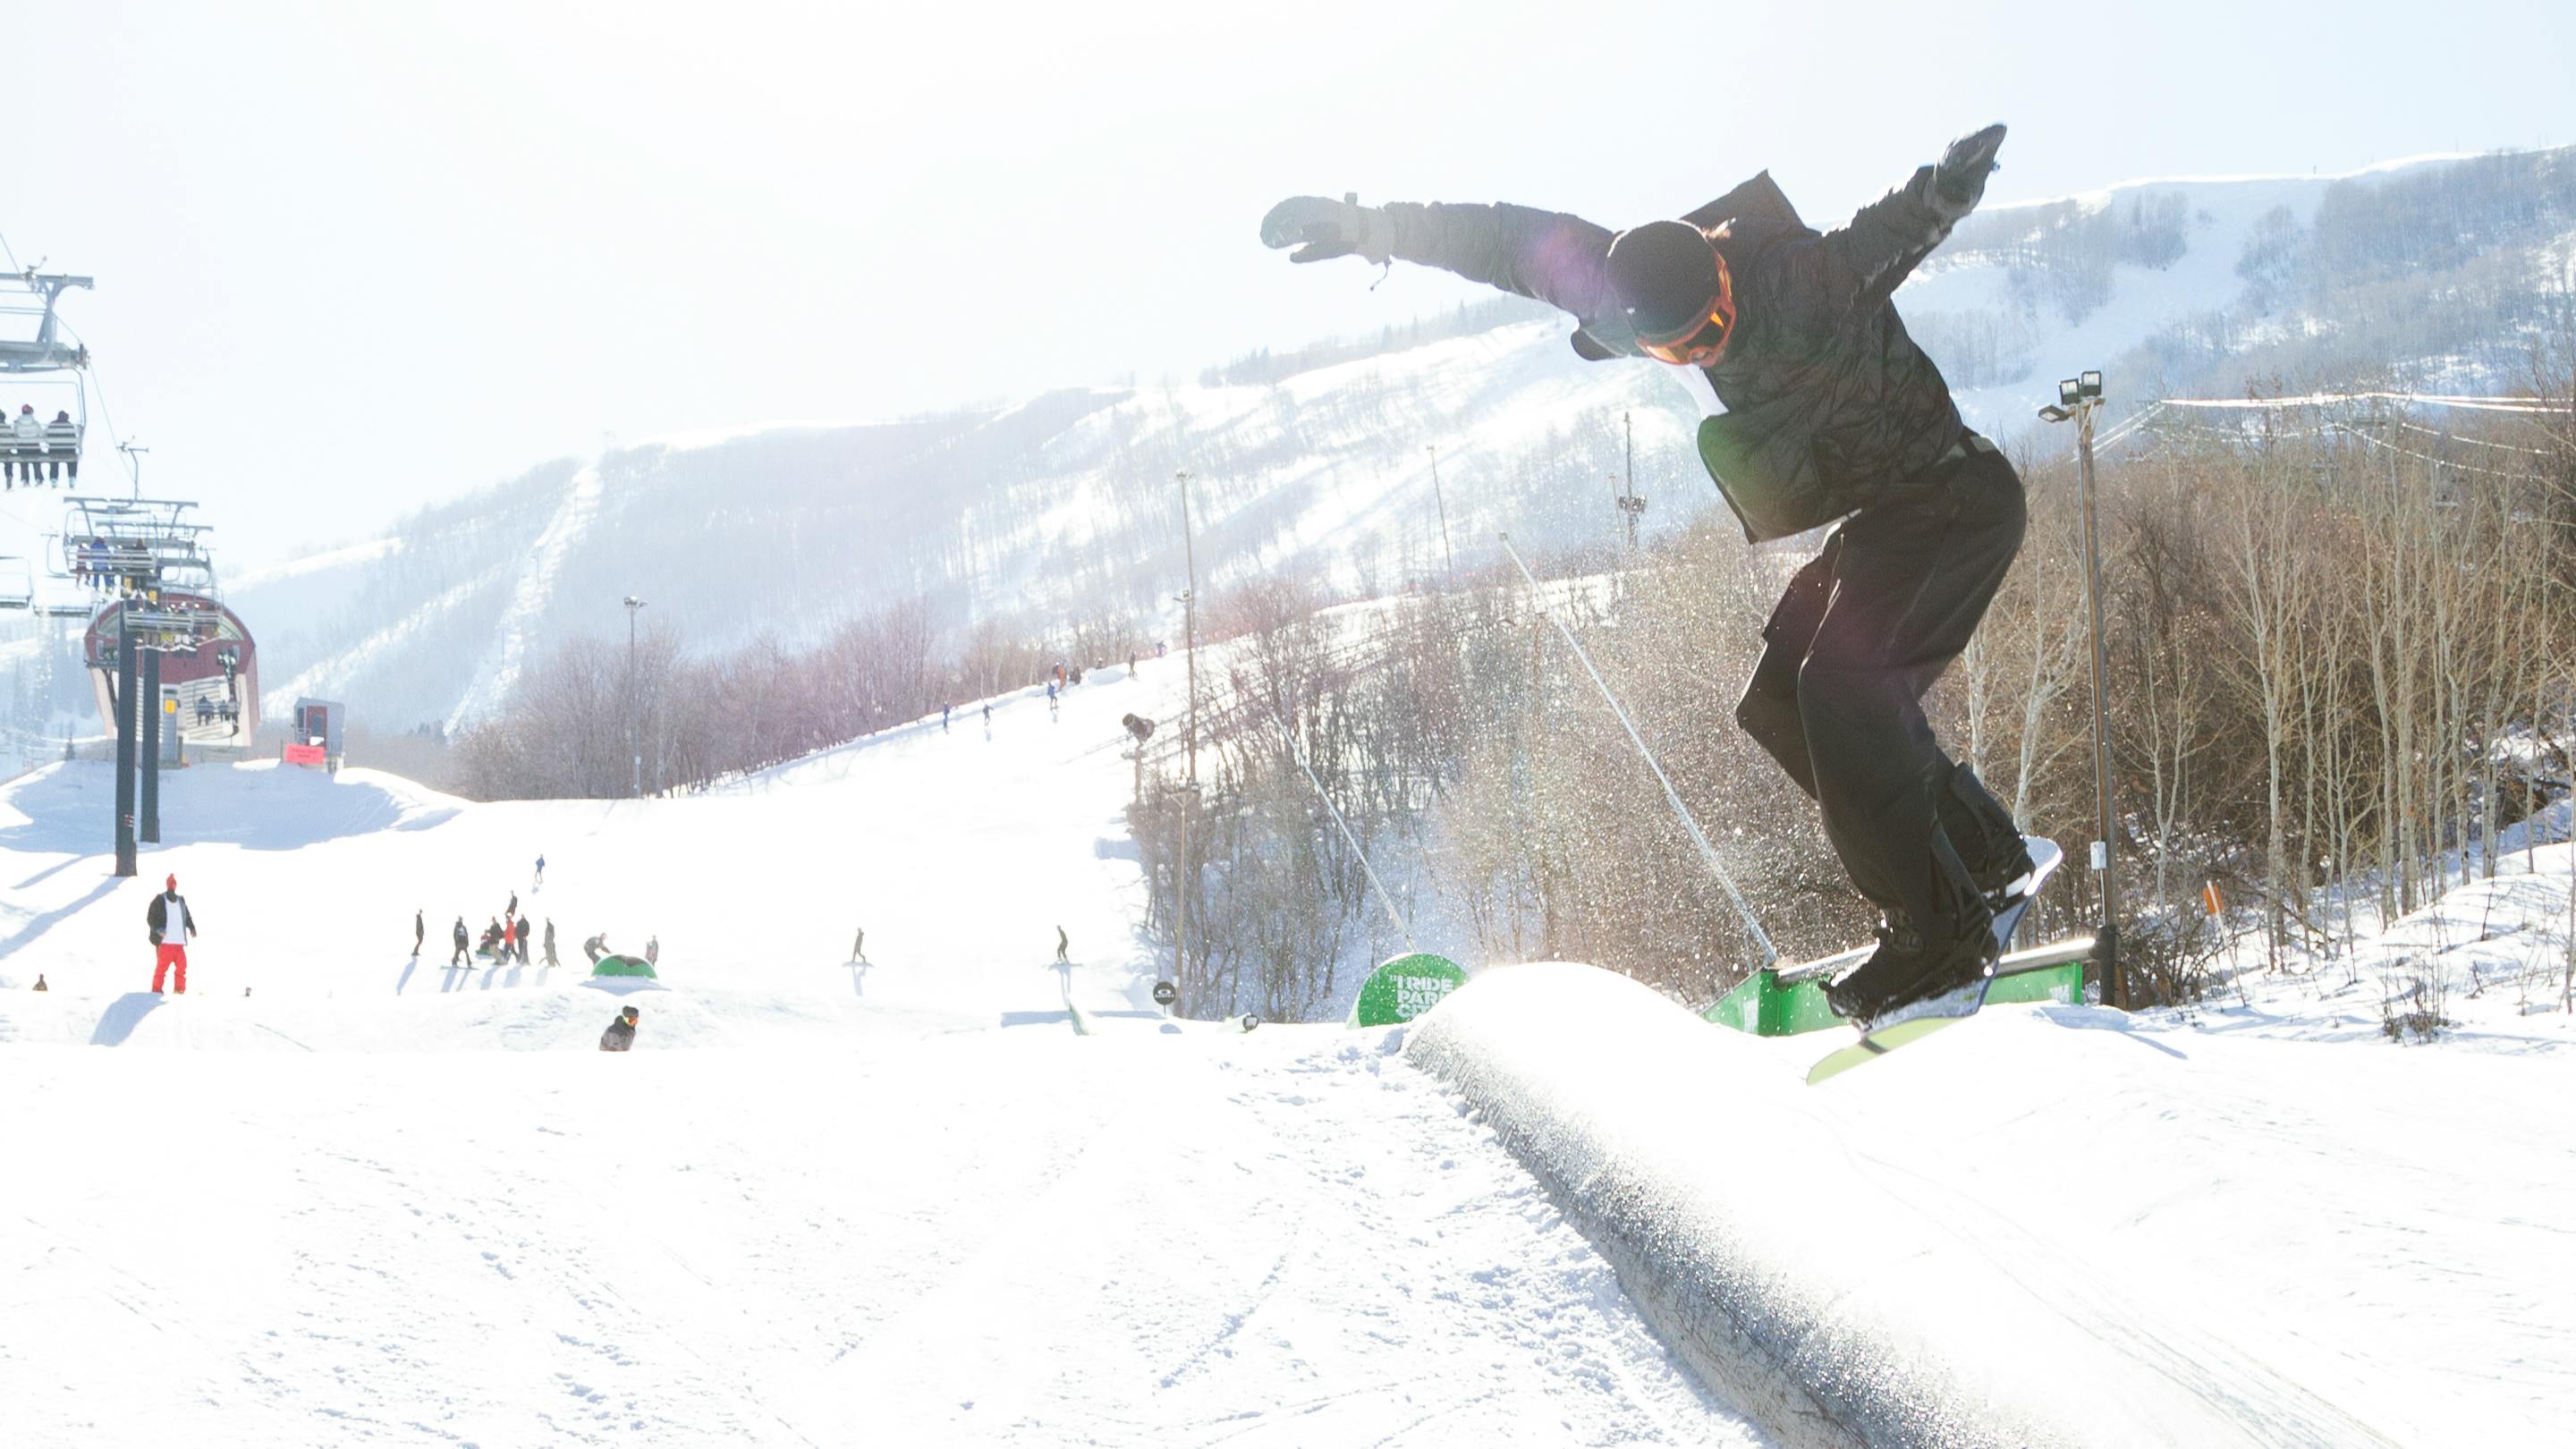 A snowboarder hits a feature in a park at a ski resort.